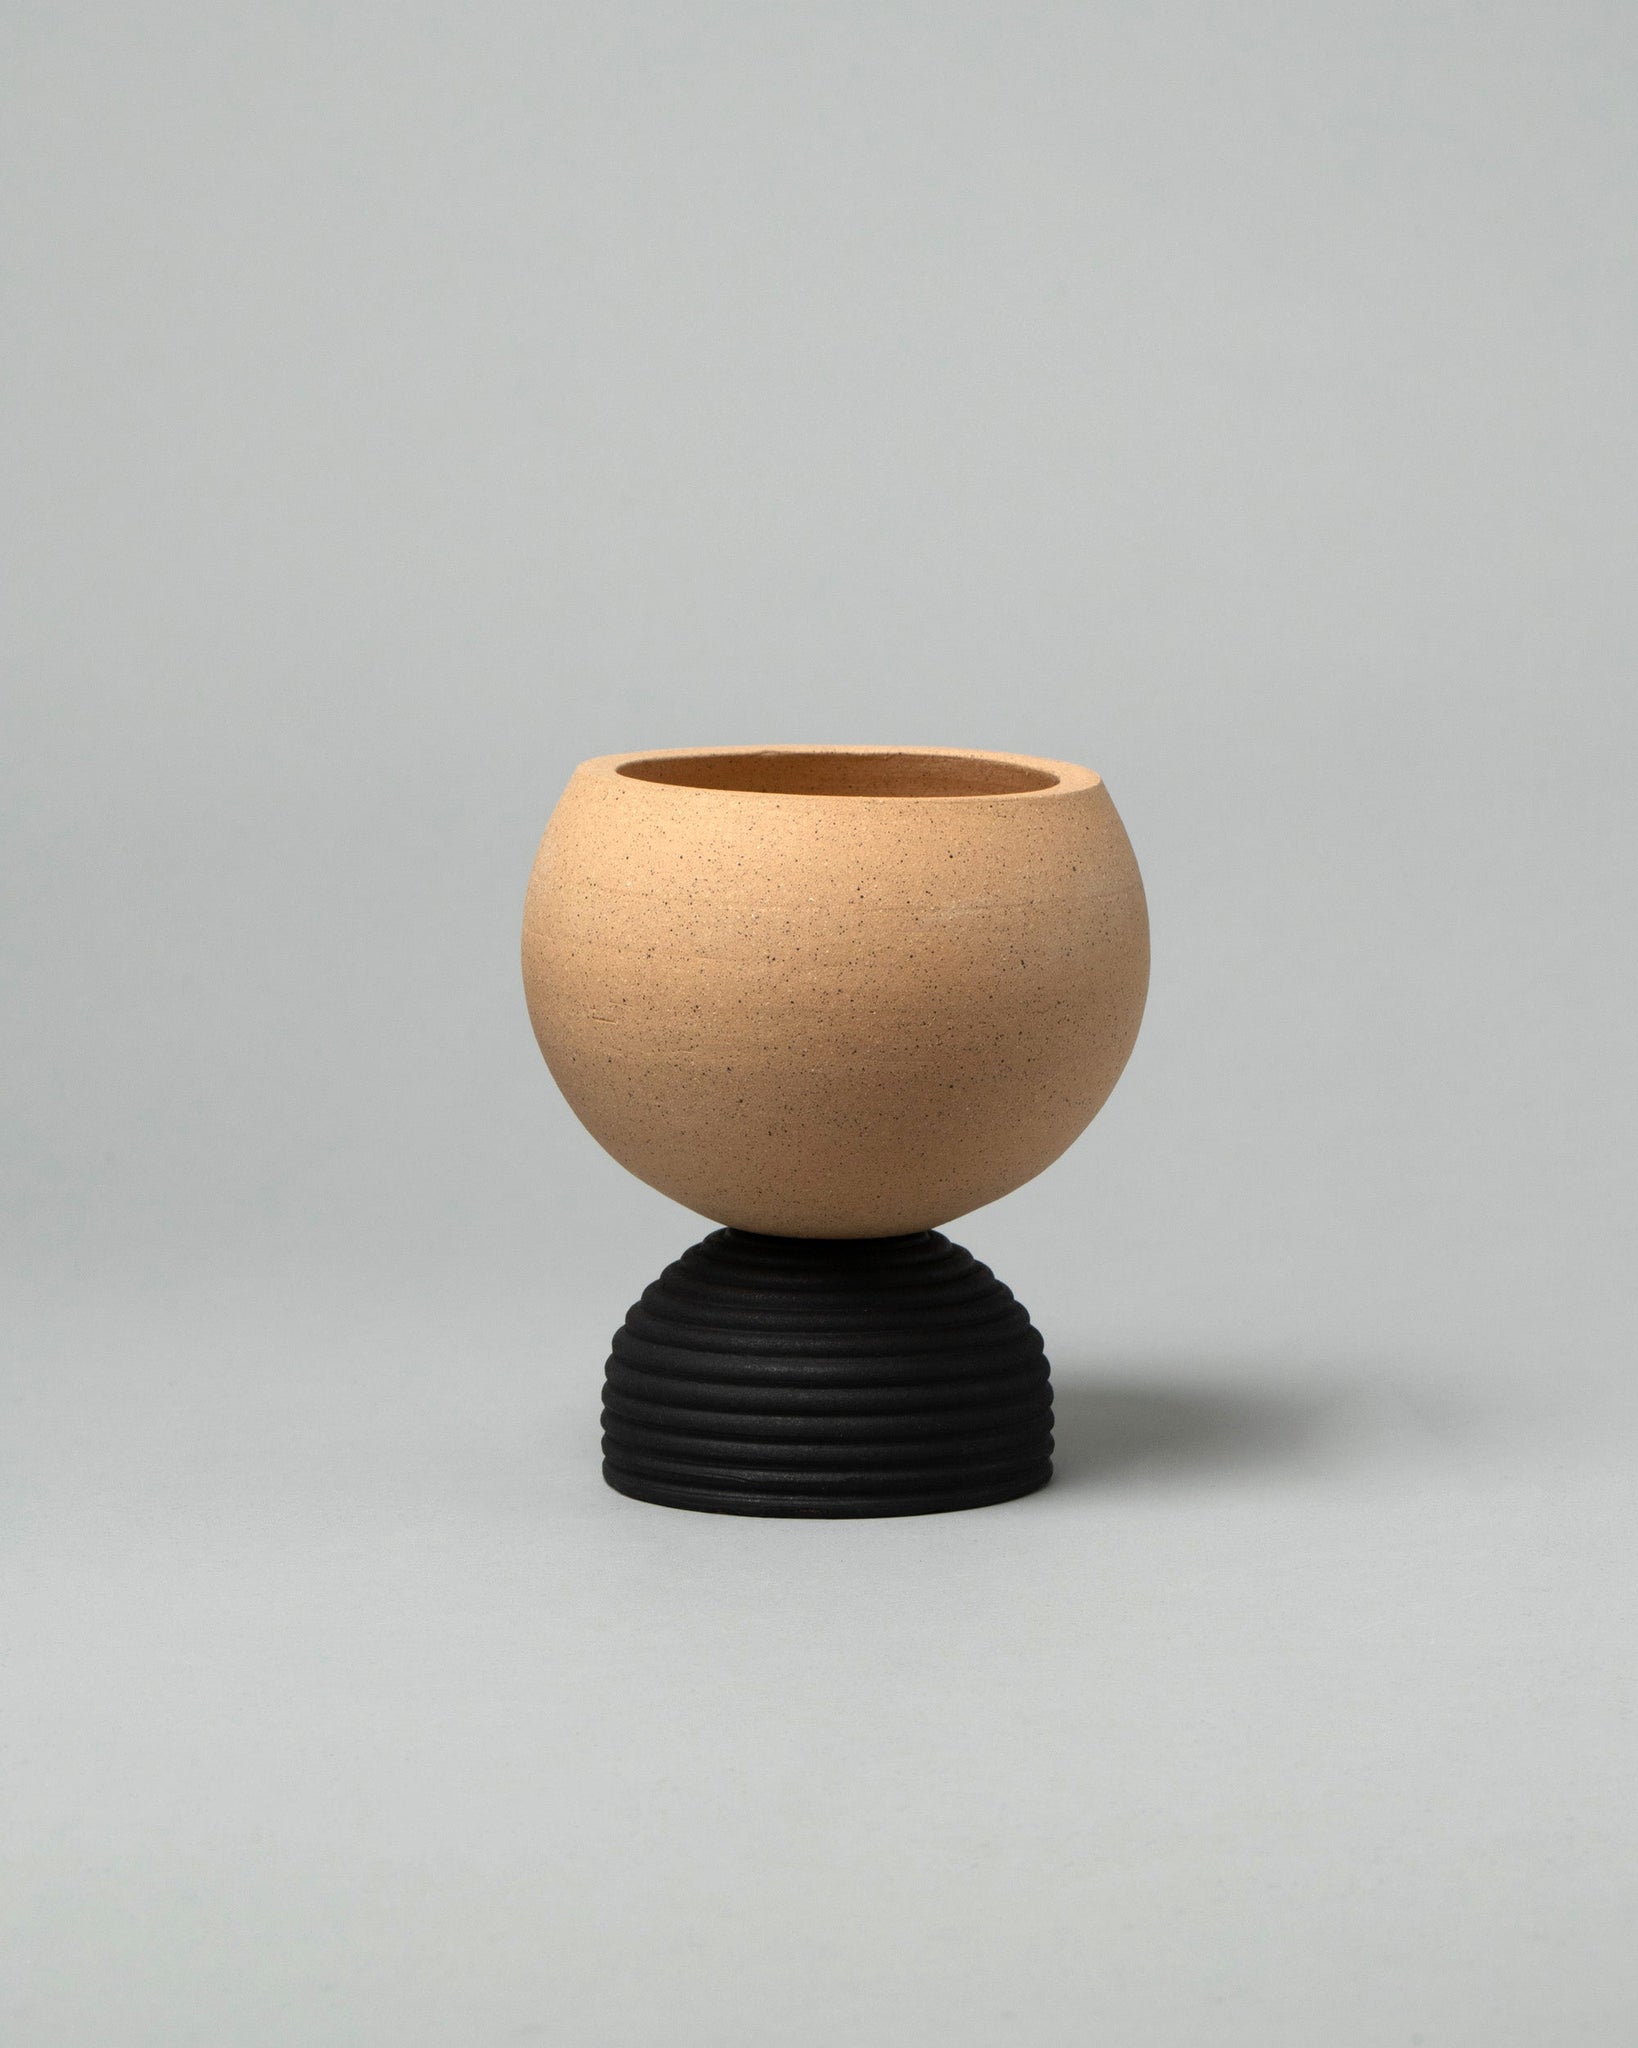 Product photo of Caudex planter on a neutral-light background.